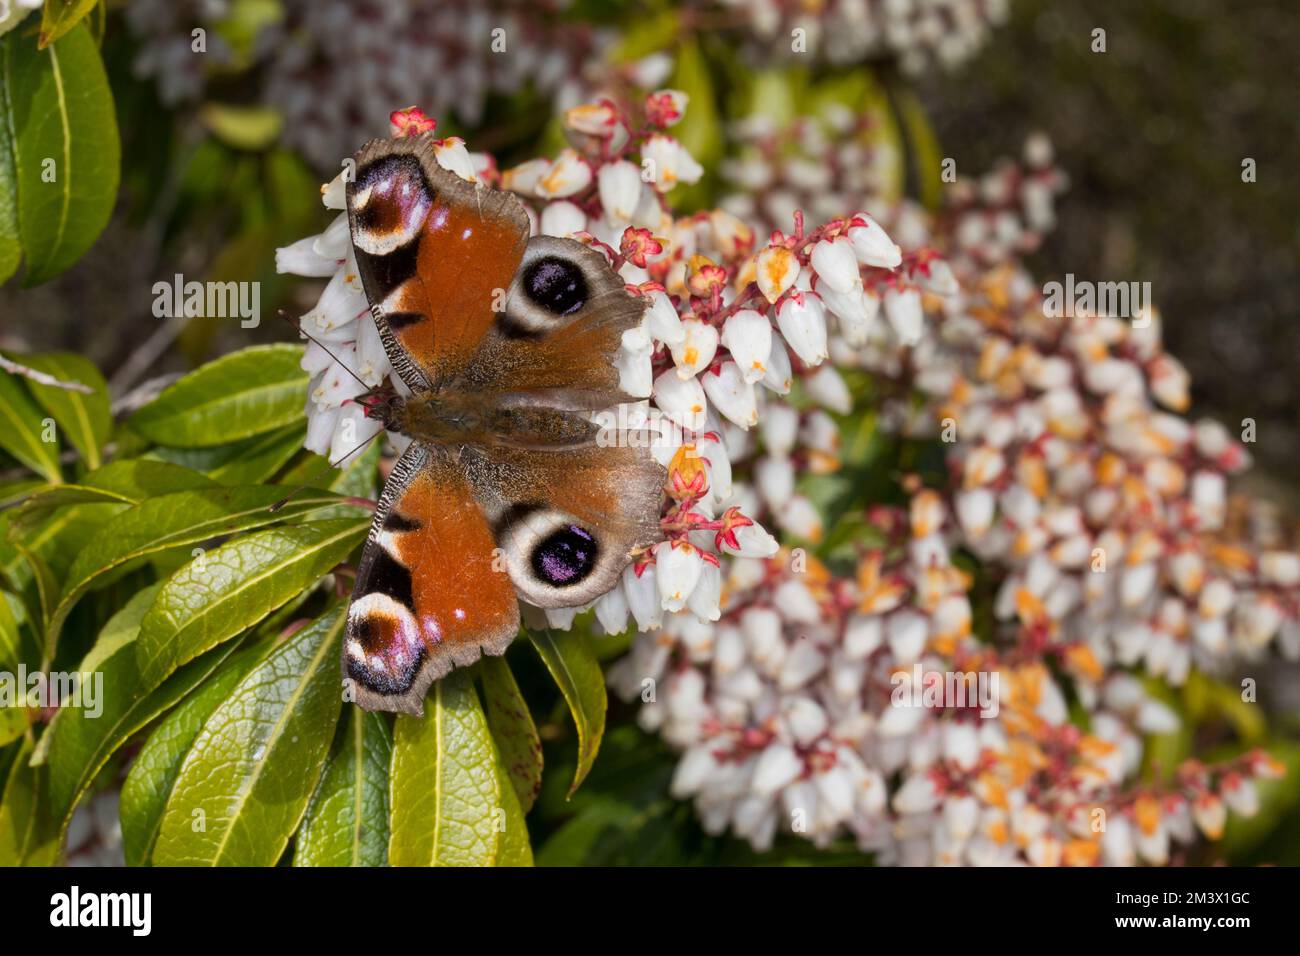 Peacock butterfly (Aglaiis io) adult feeding on Pieris japonica flowers in a garden in Spring. Powys, Wales. March. Stock Photo